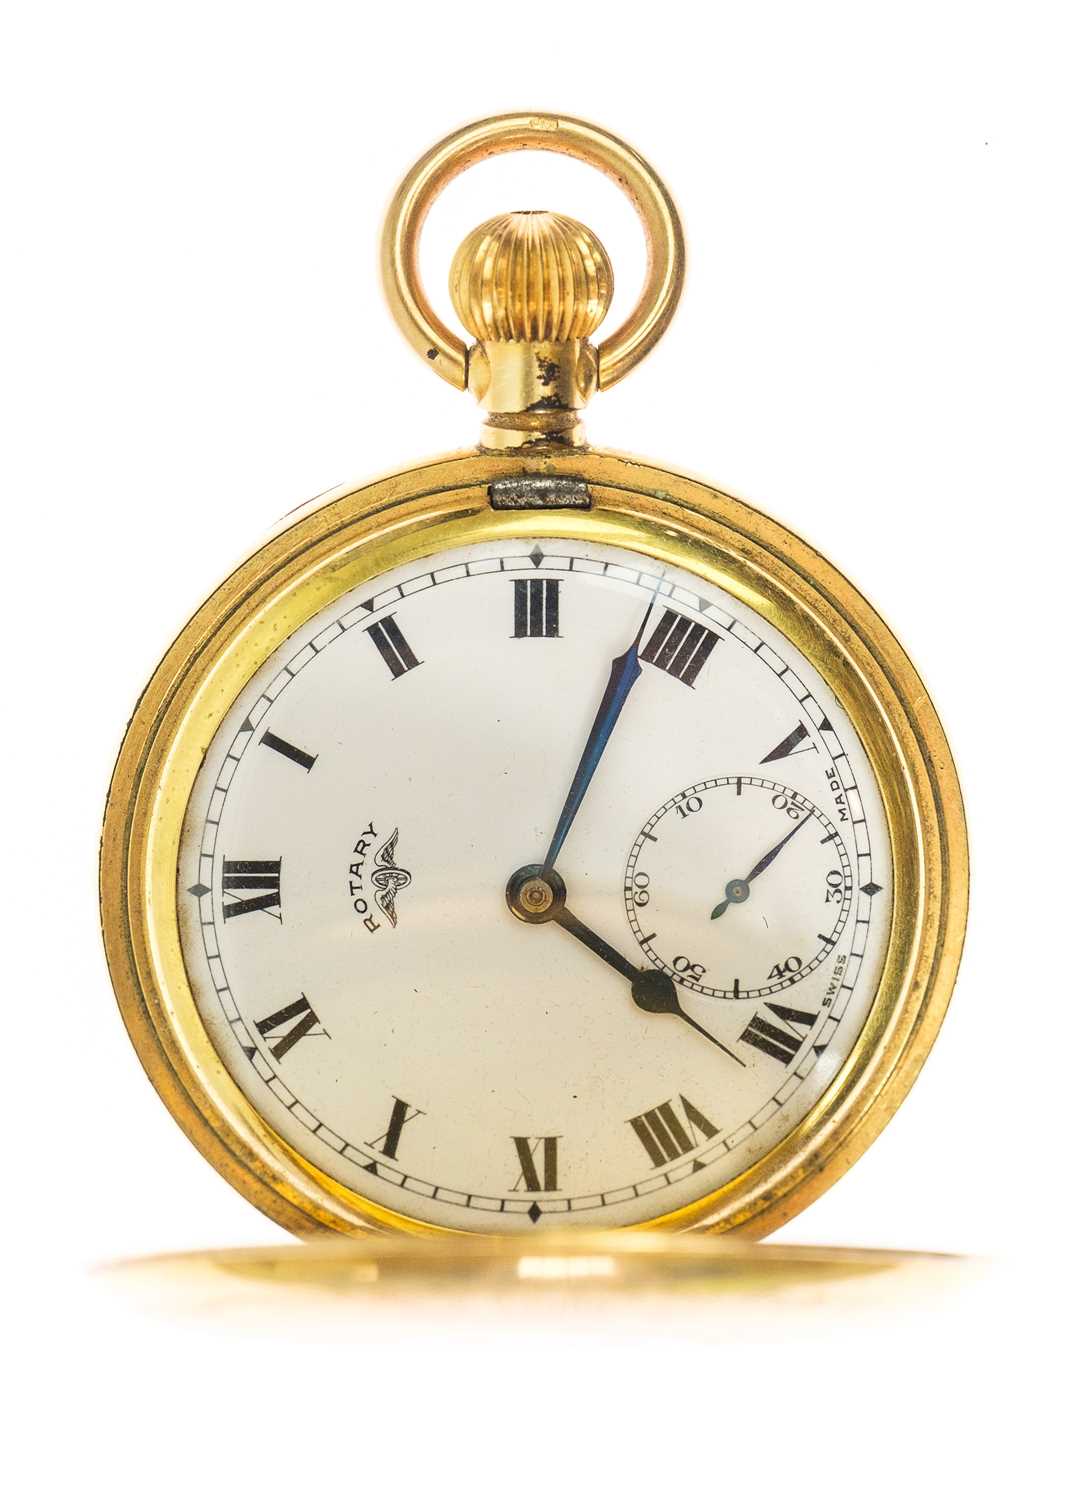 A gold-plated full hunter crown wind pocket watch by Rotary. - Image 5 of 5